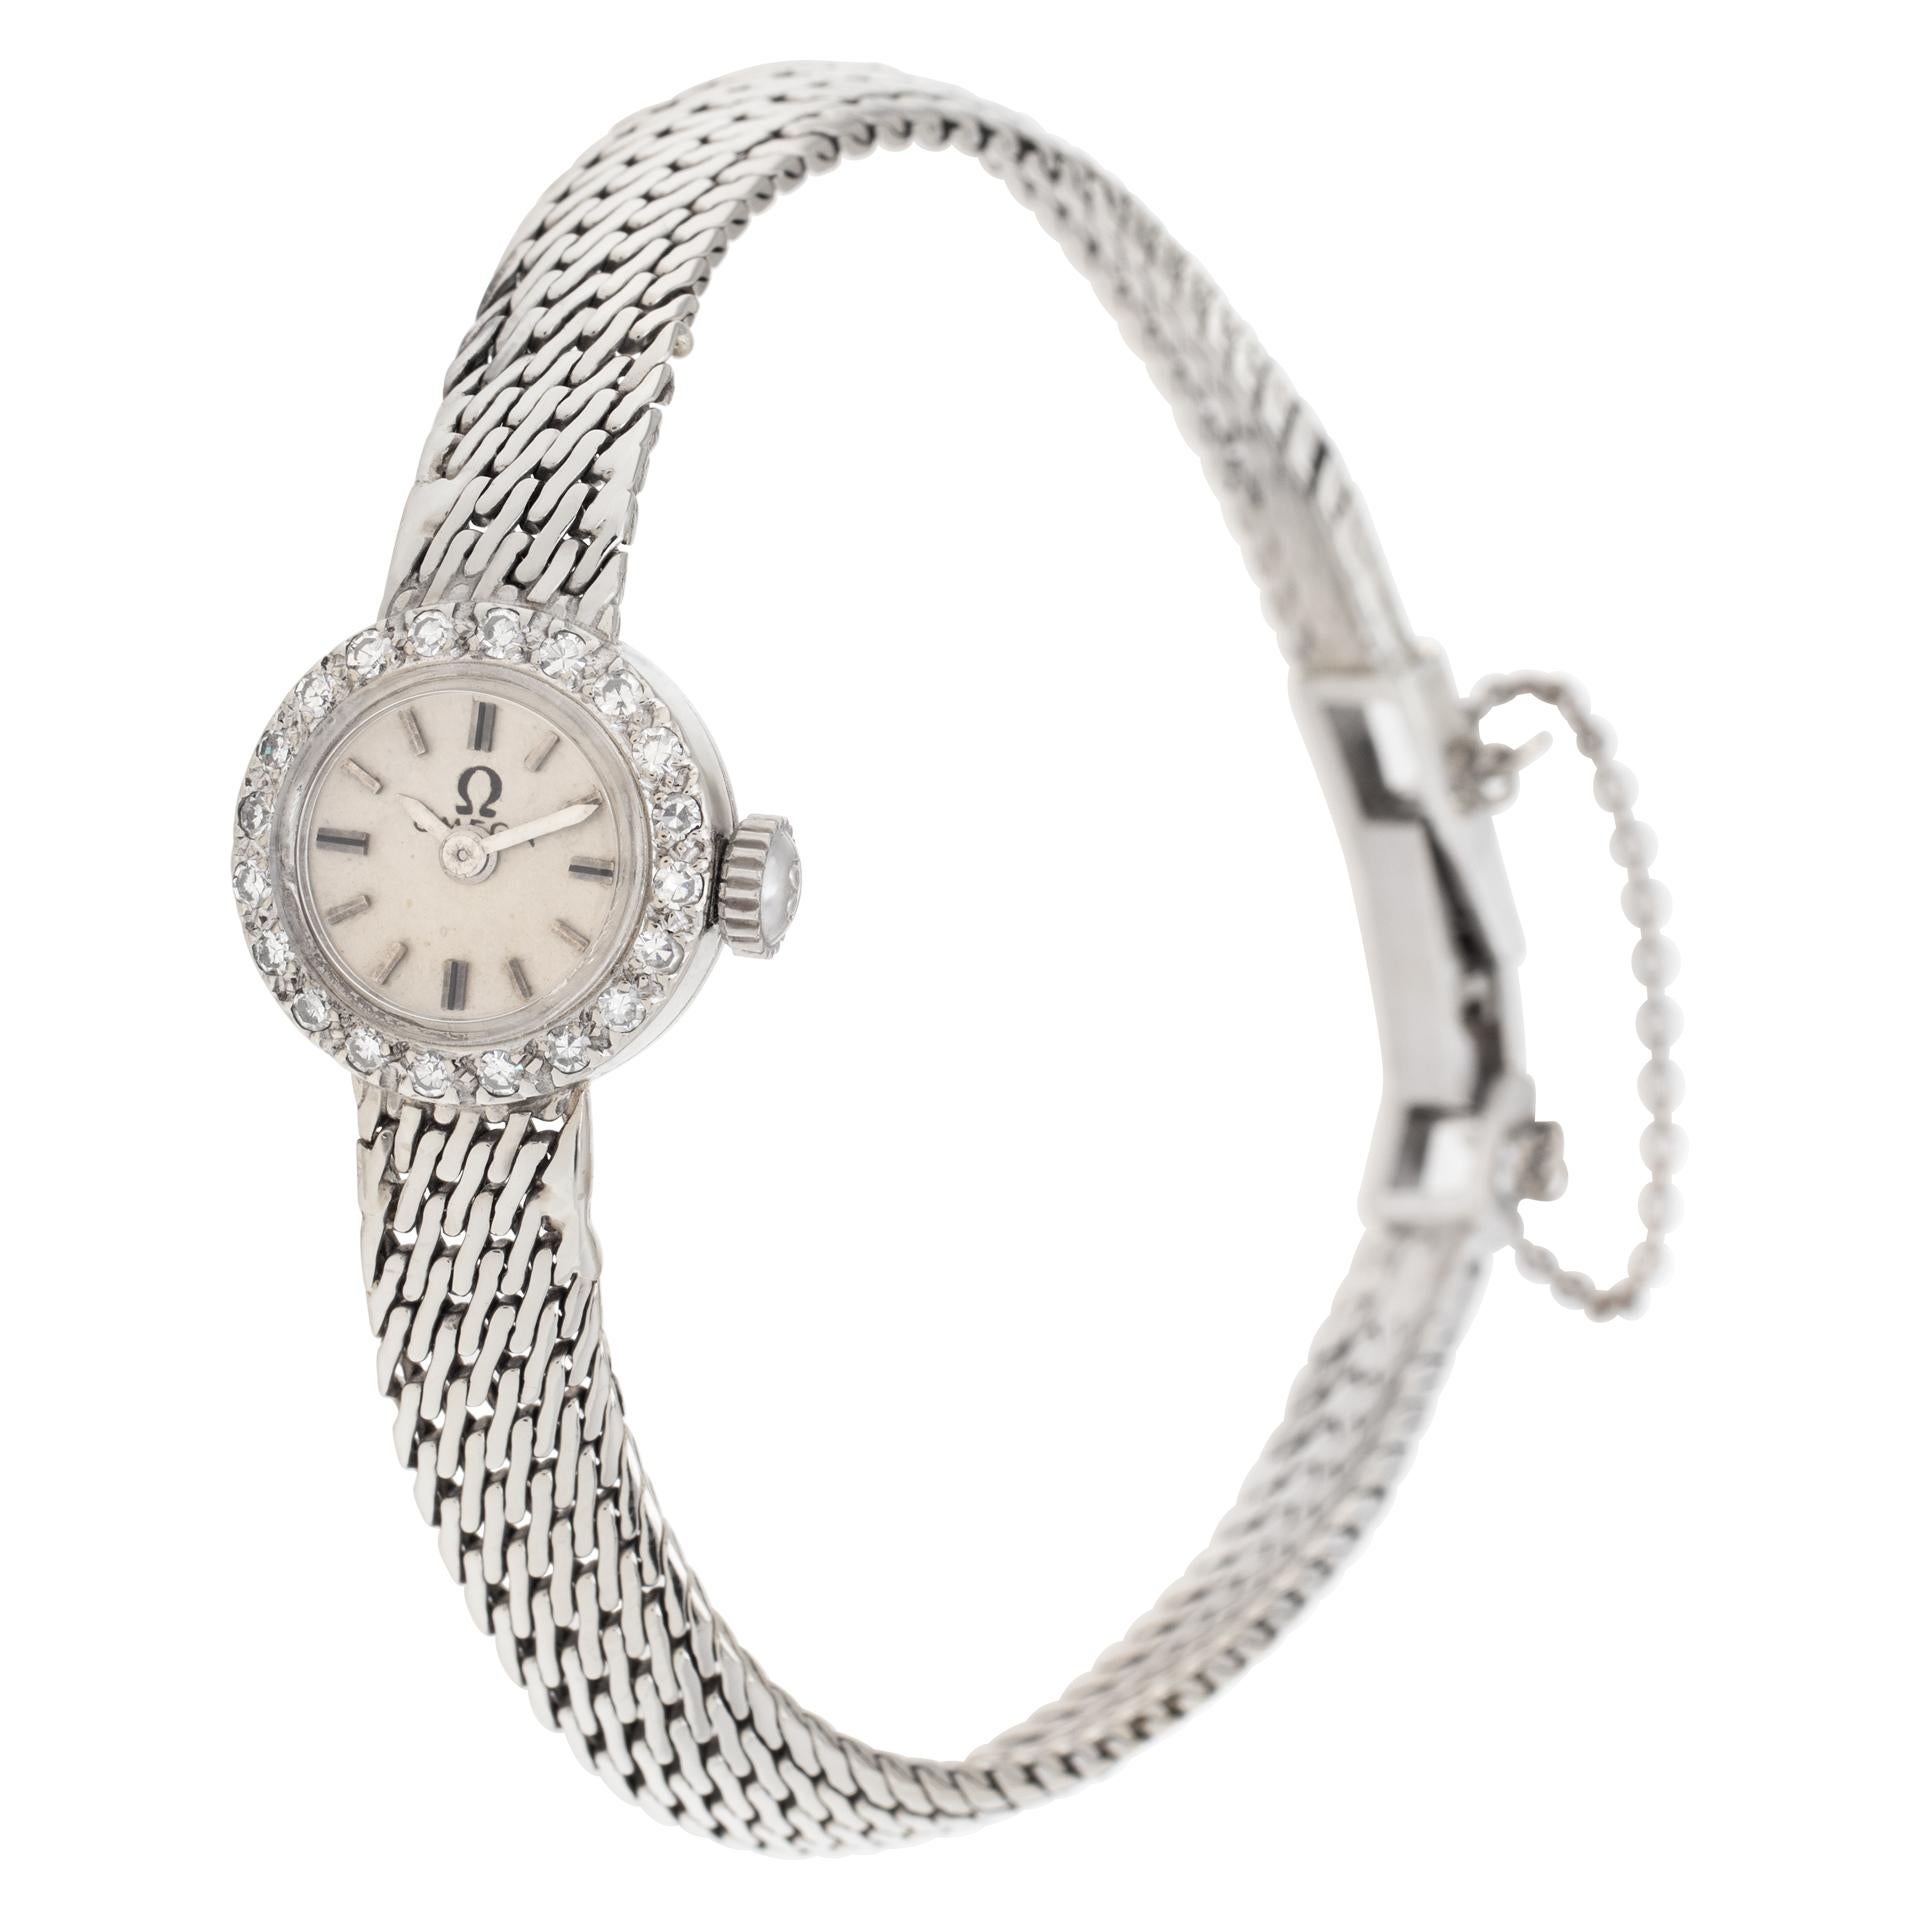 Vintage Omega Cocktail watch in 14k white gold with diamond bezel. Mesh bracelet. Manual wind. 13.5 mm case size. Will fit up to a 6.25